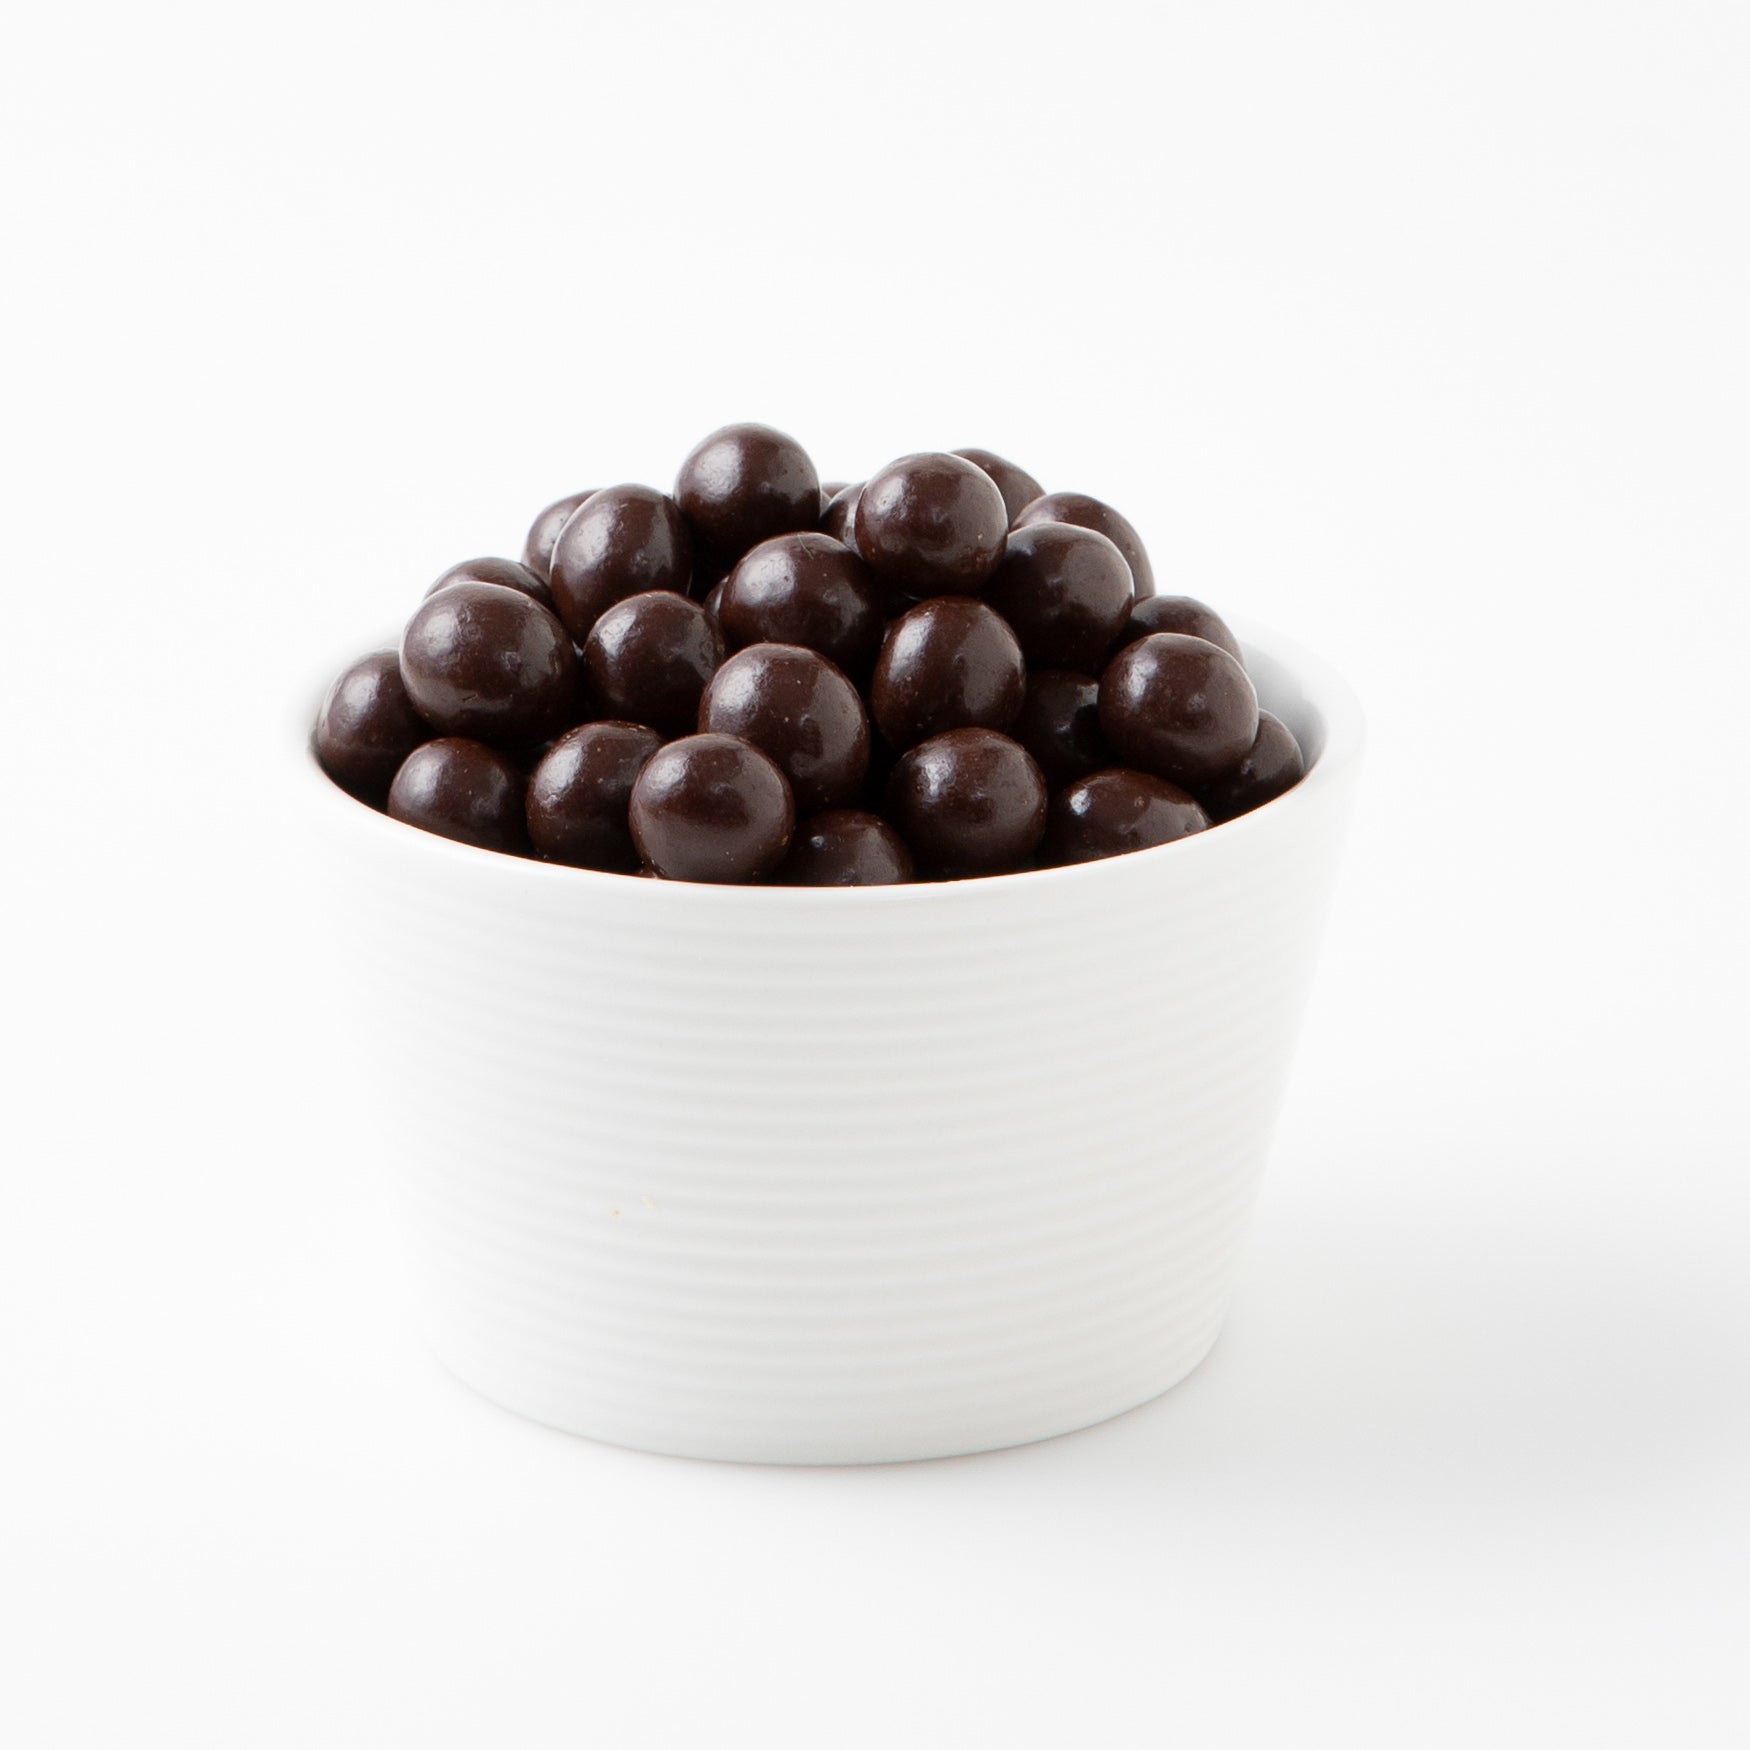 Dark Chocolate Coffee Beans (Chocolates) in white bowl - Naked Foods